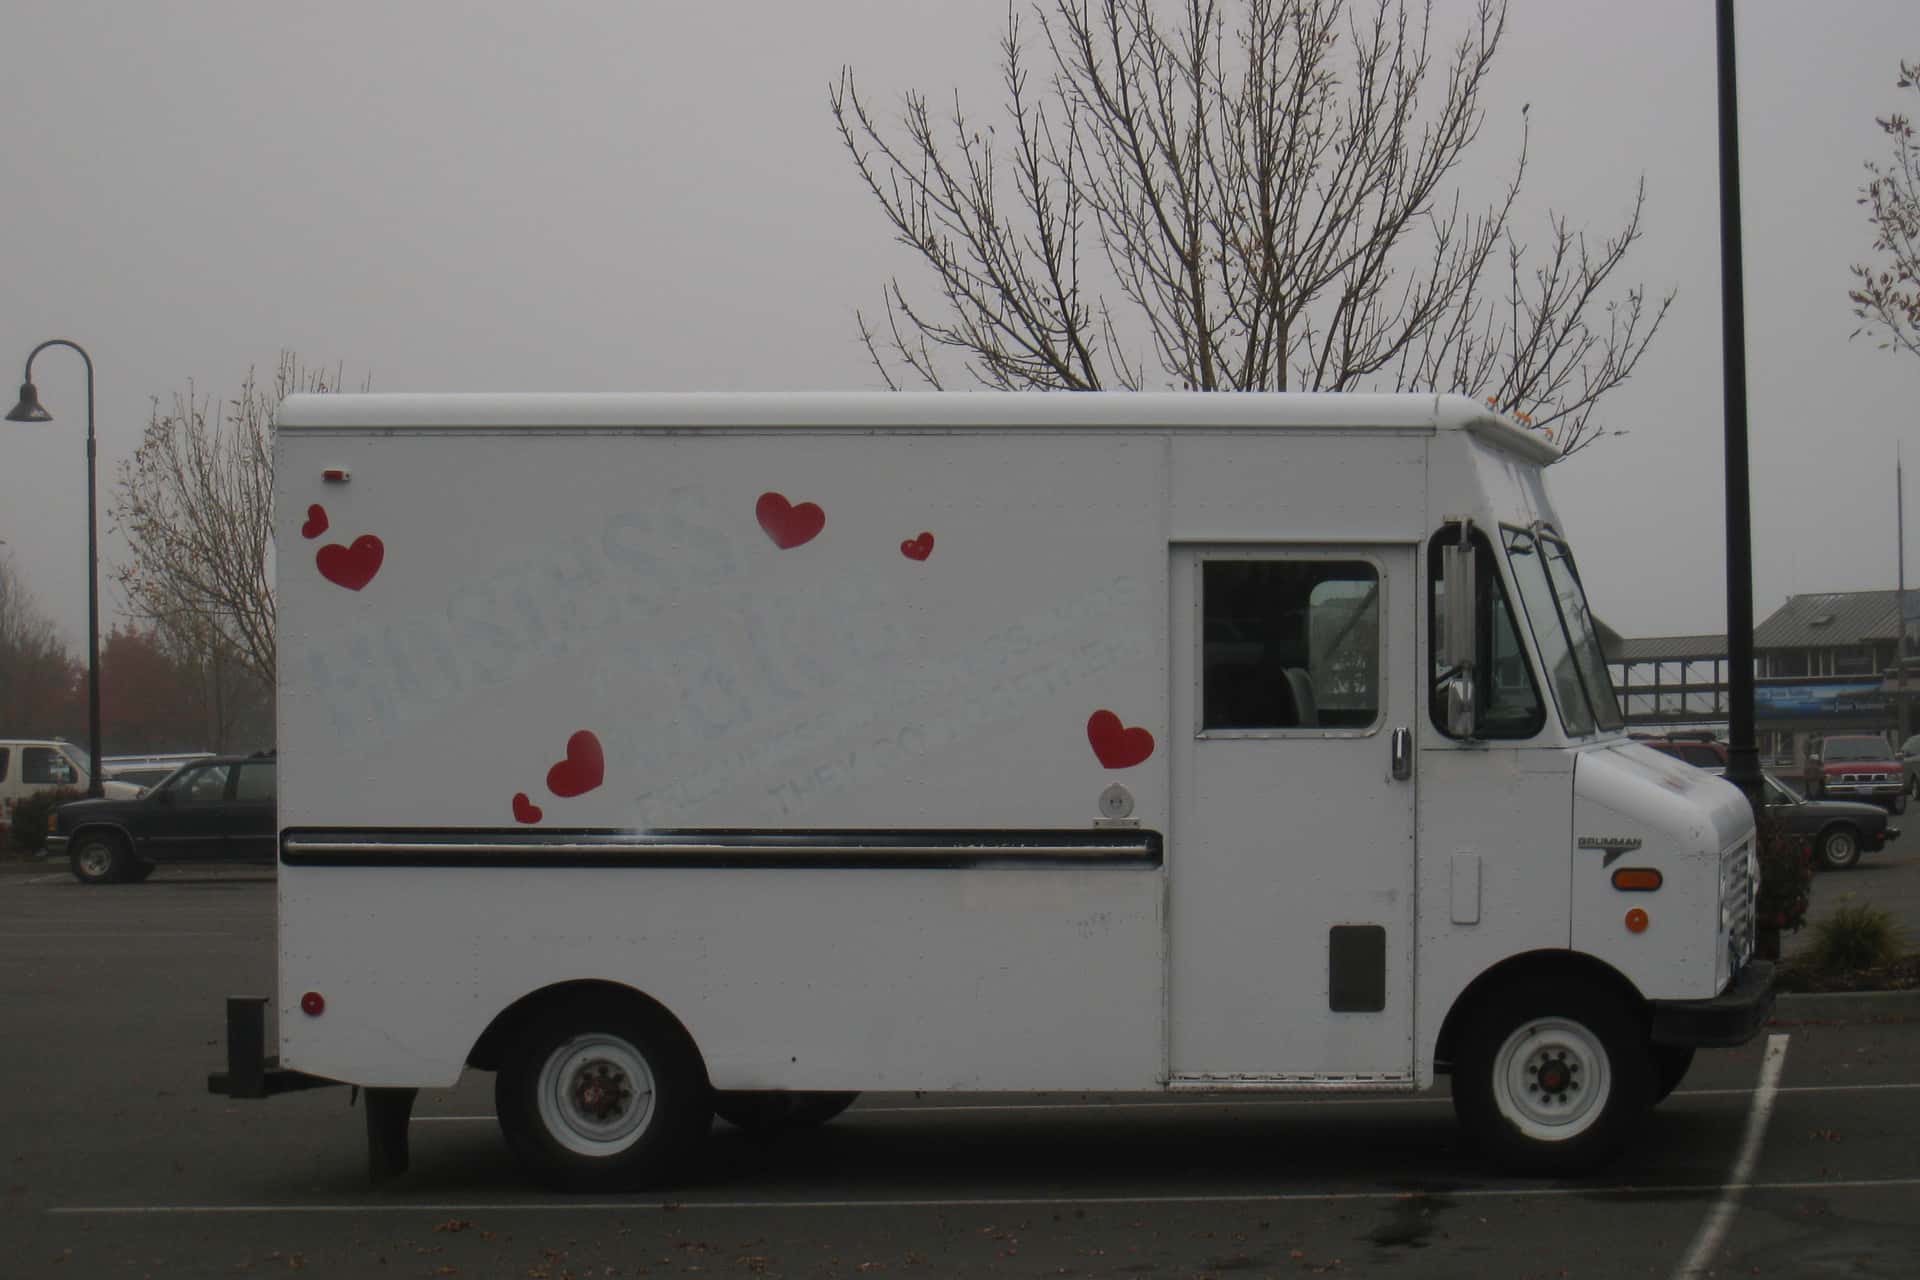 Hostess Cake truck with all of its branding whitewashed except for the hearts